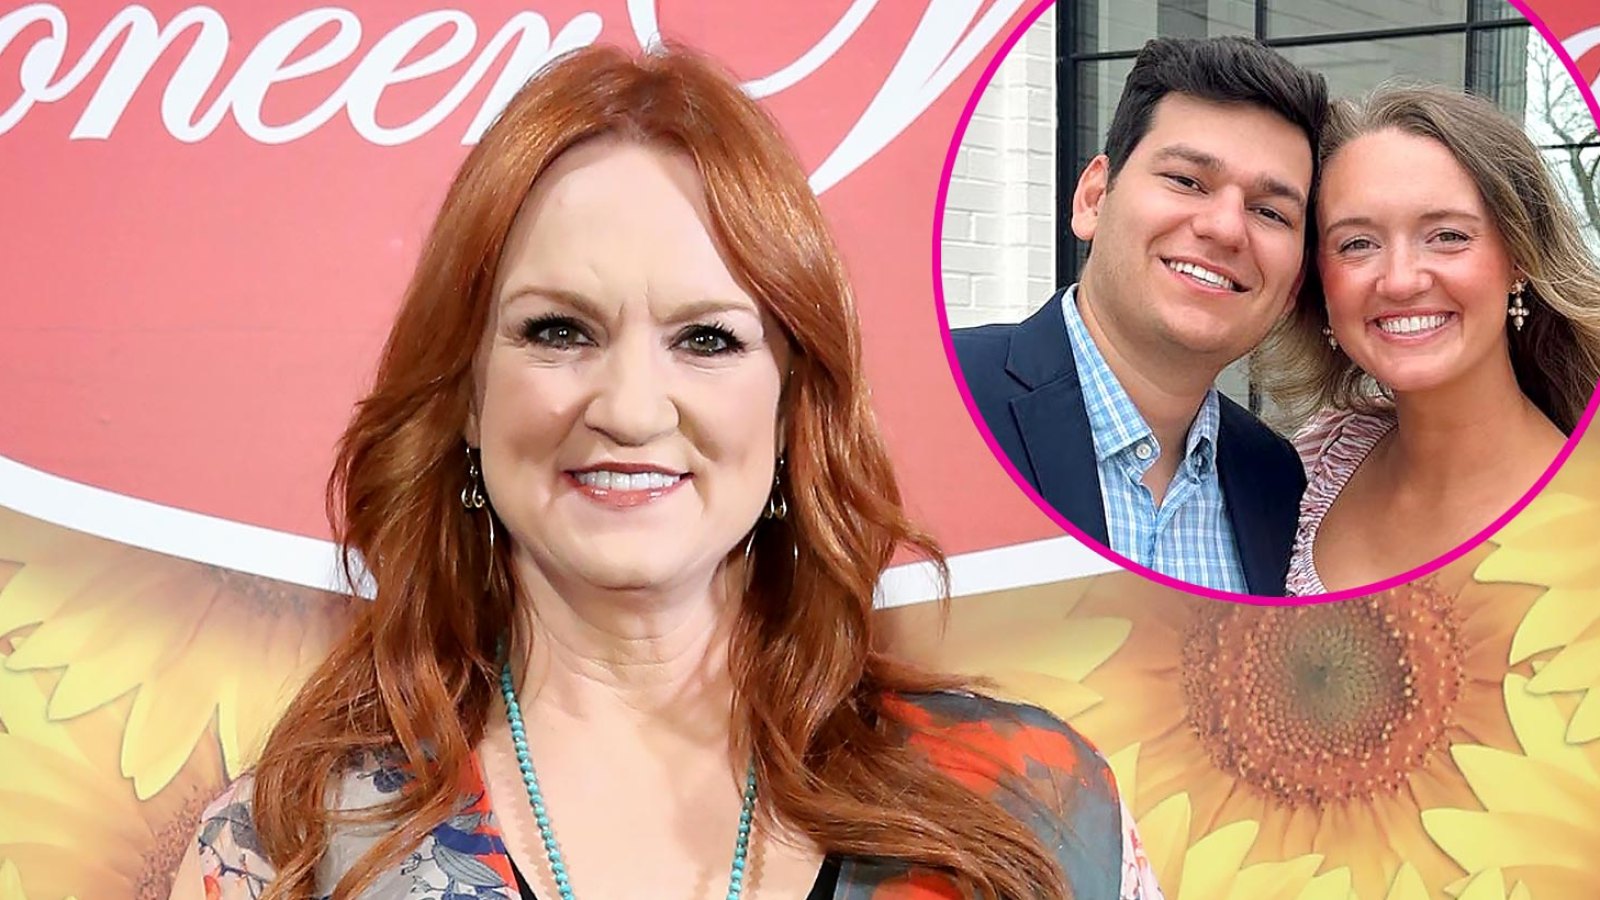 Pioneer Woman’s Ree Drummond’s Daughter Announces She’s Pregnant- ‘It’s Surreal!’